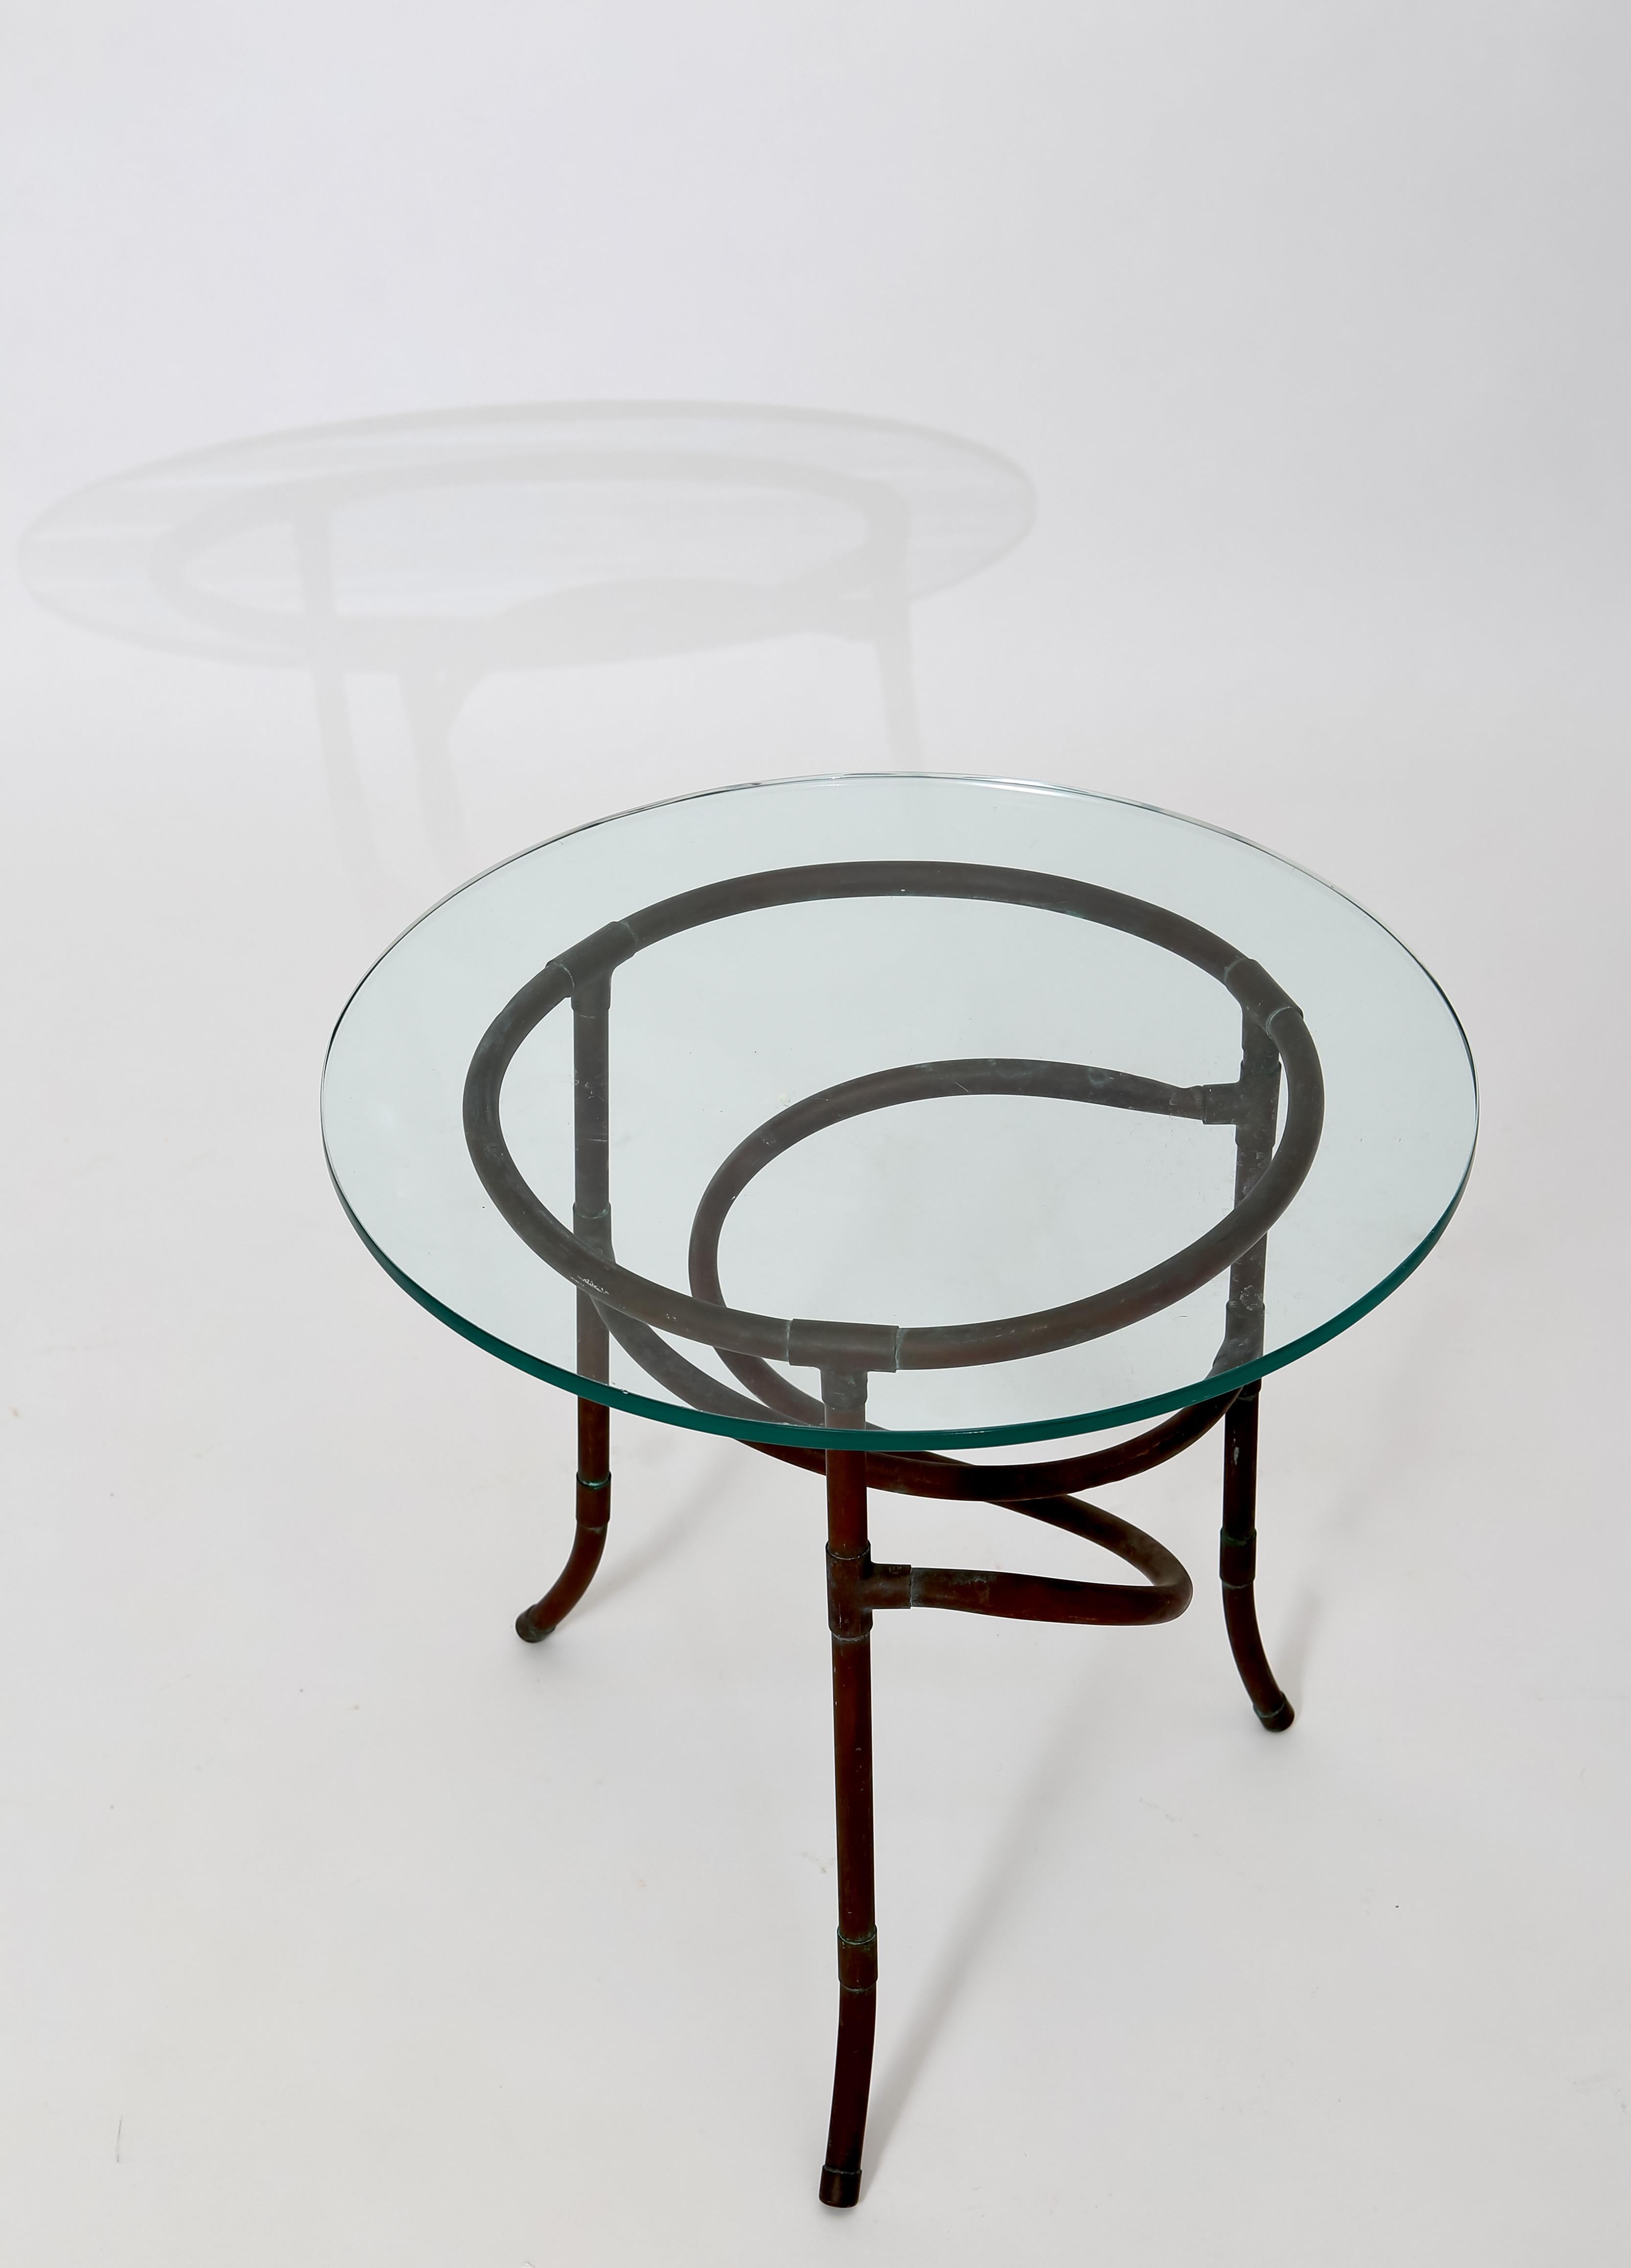 Constructed of copper tube, this interestingly sculptural accent table is a perfect statement piece next to your favorite chair. Glass top has a clean crisp edge and is 1/2” thick. Hand made circa 1980s.